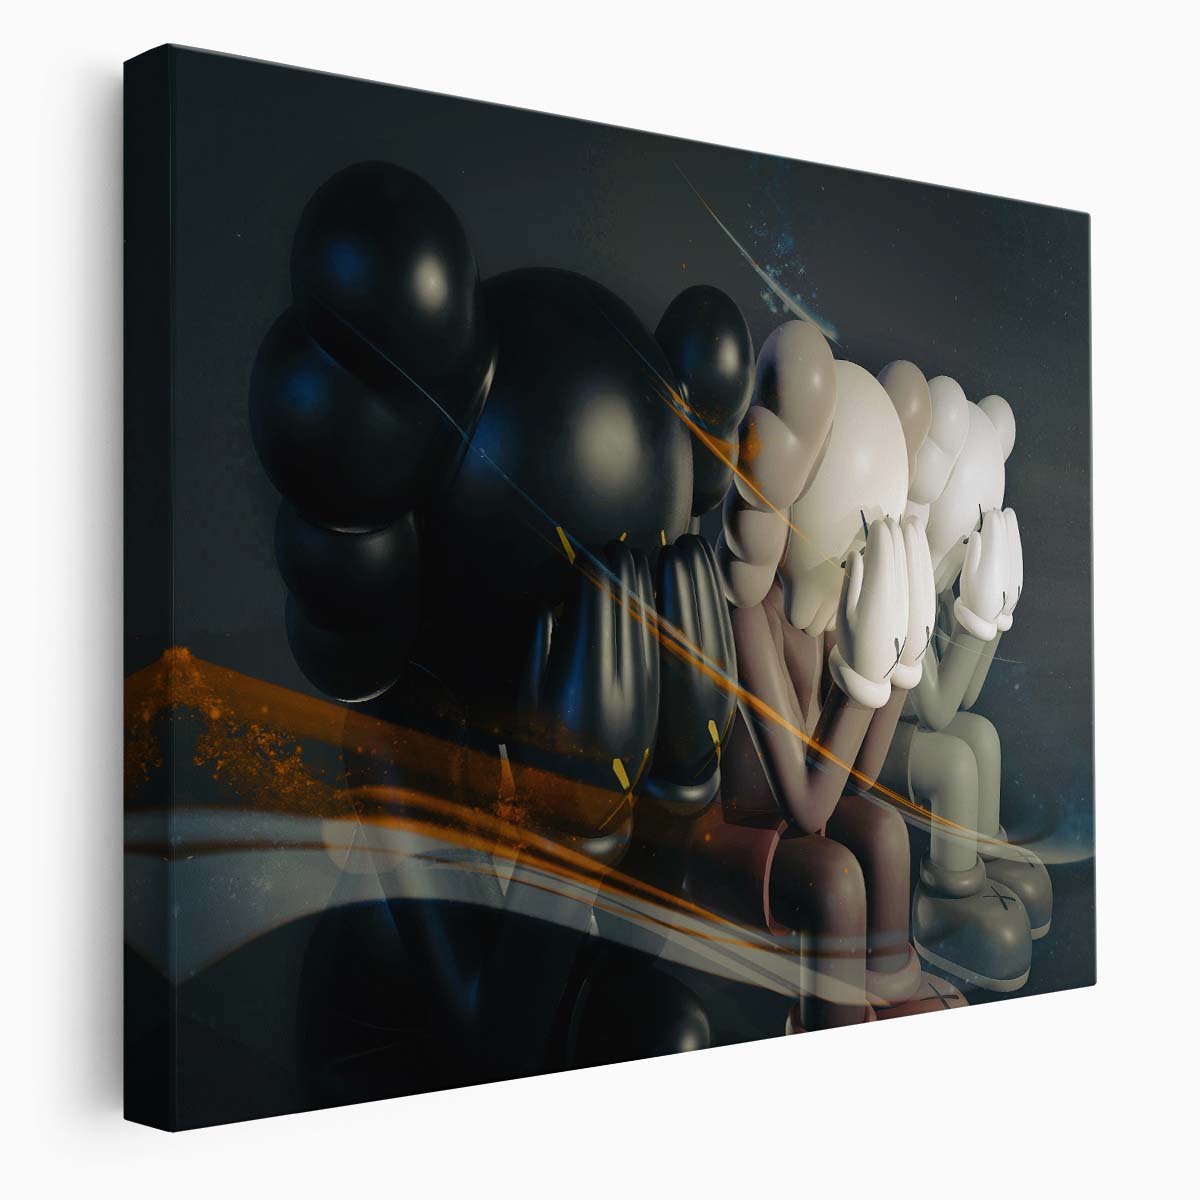 Three Wise Kaws Street Wall Art by Luxuriance Designs. Made in USA.